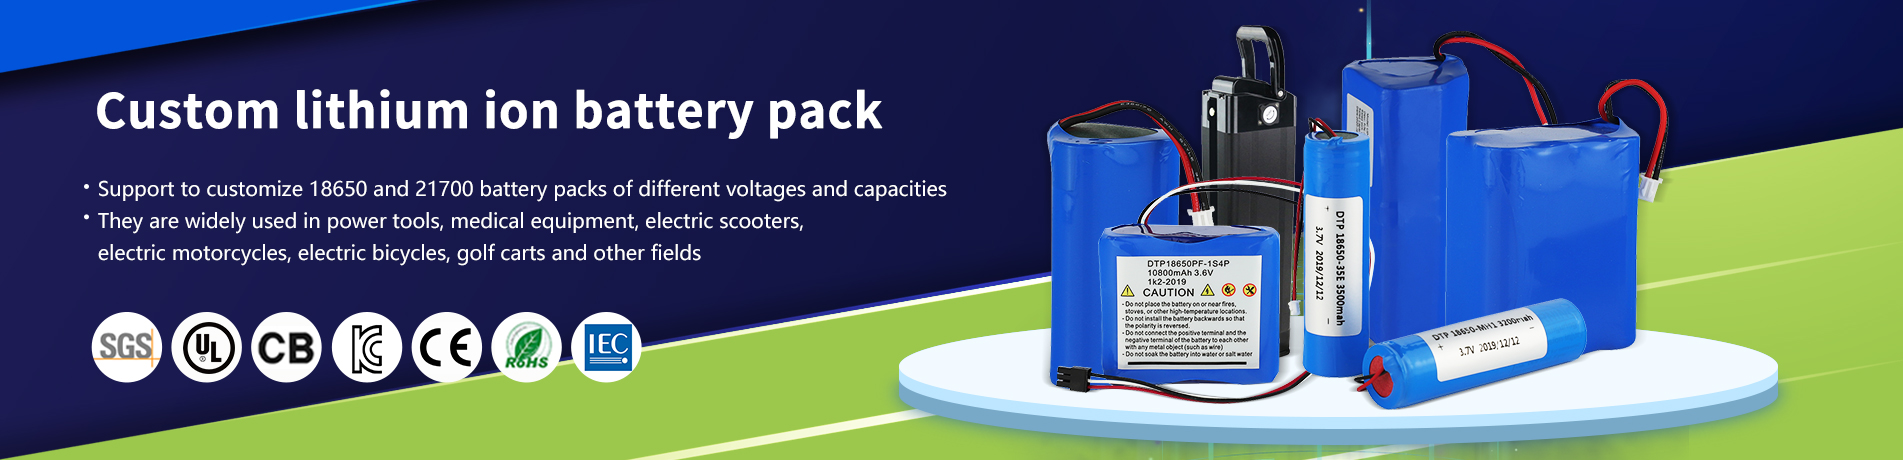 Enhance the quality of lithium batteries with Internation standard By DataPower